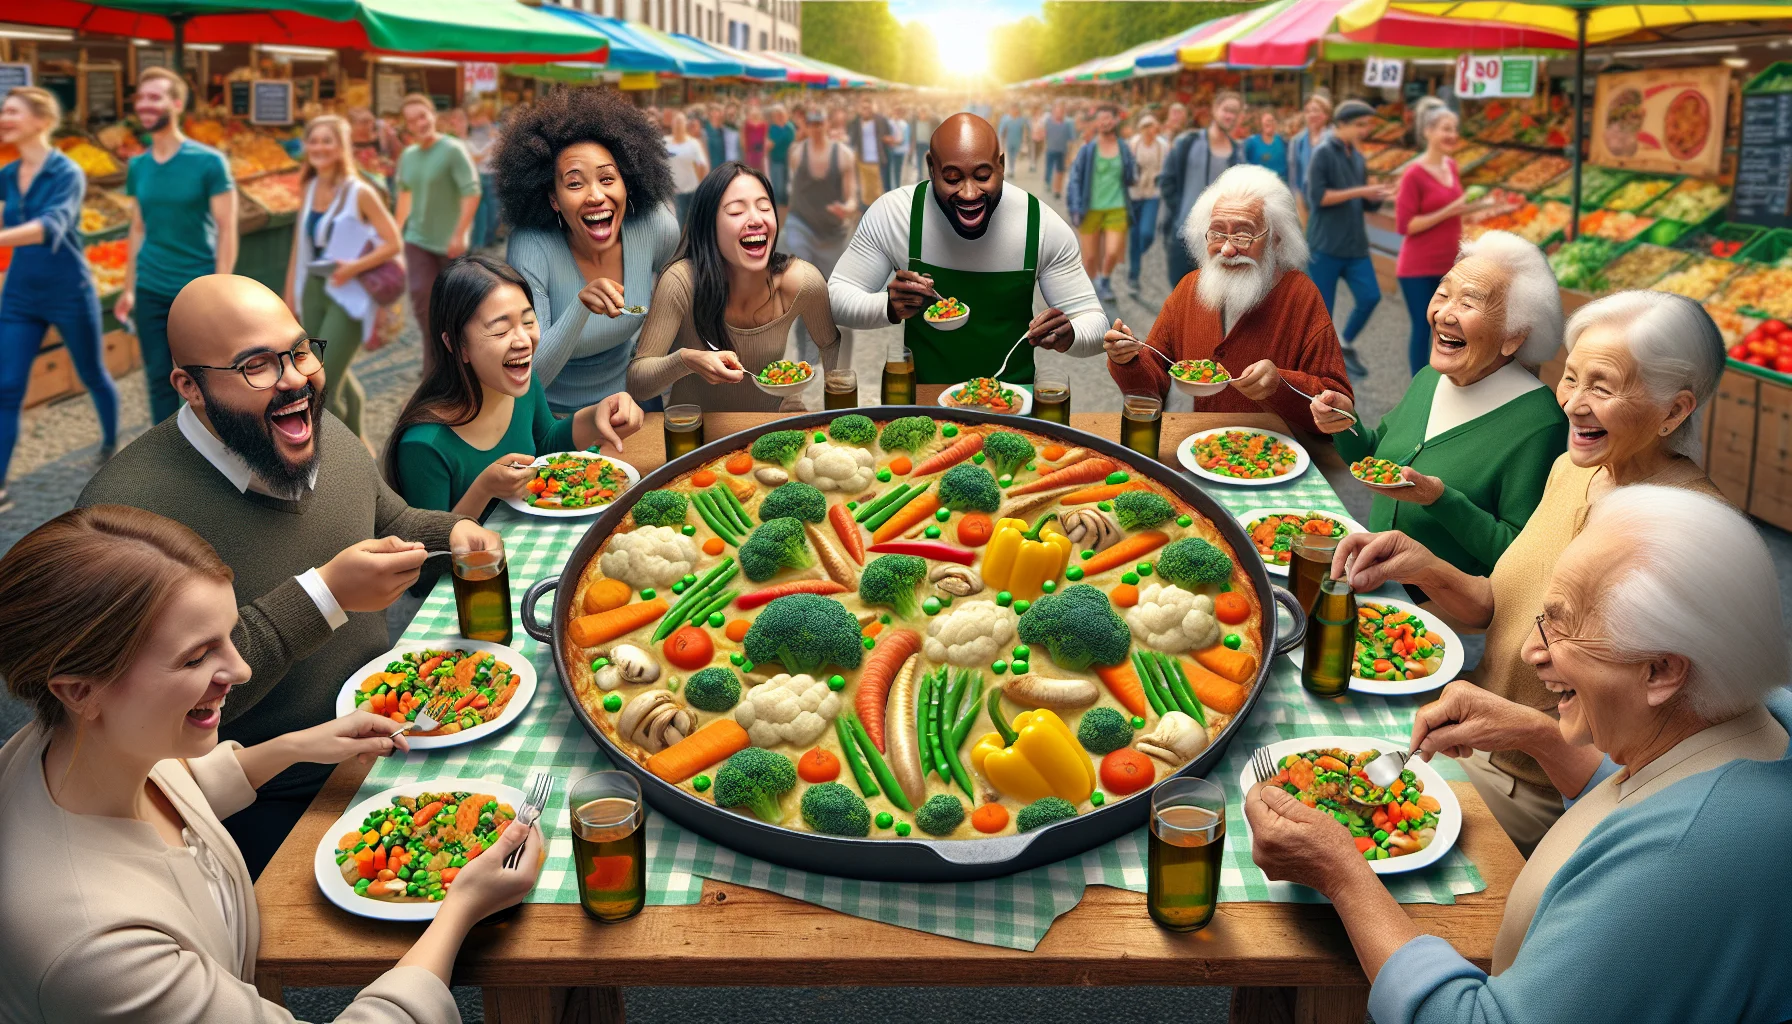 Create a humorous and enticing image that depicts a vibrant Spring Vegetable Casserole dish prepared with plenty of colorful vegetables like broccoli, carrots, peas, bell peppers, and asparagus. The scene takes place in a bustling farmers market on a sunny spring day, where easily visible price tags demonstrate the affordability of the ingredients. Surrounding the casserole, a diverse group of people, including a Middle-Eastern woman, a Black man, a Hispanic elderly man, and a South Asian child, are seen heartily enjoying their servings of the delectable casserole, lured by its healthy appeal and affordability.